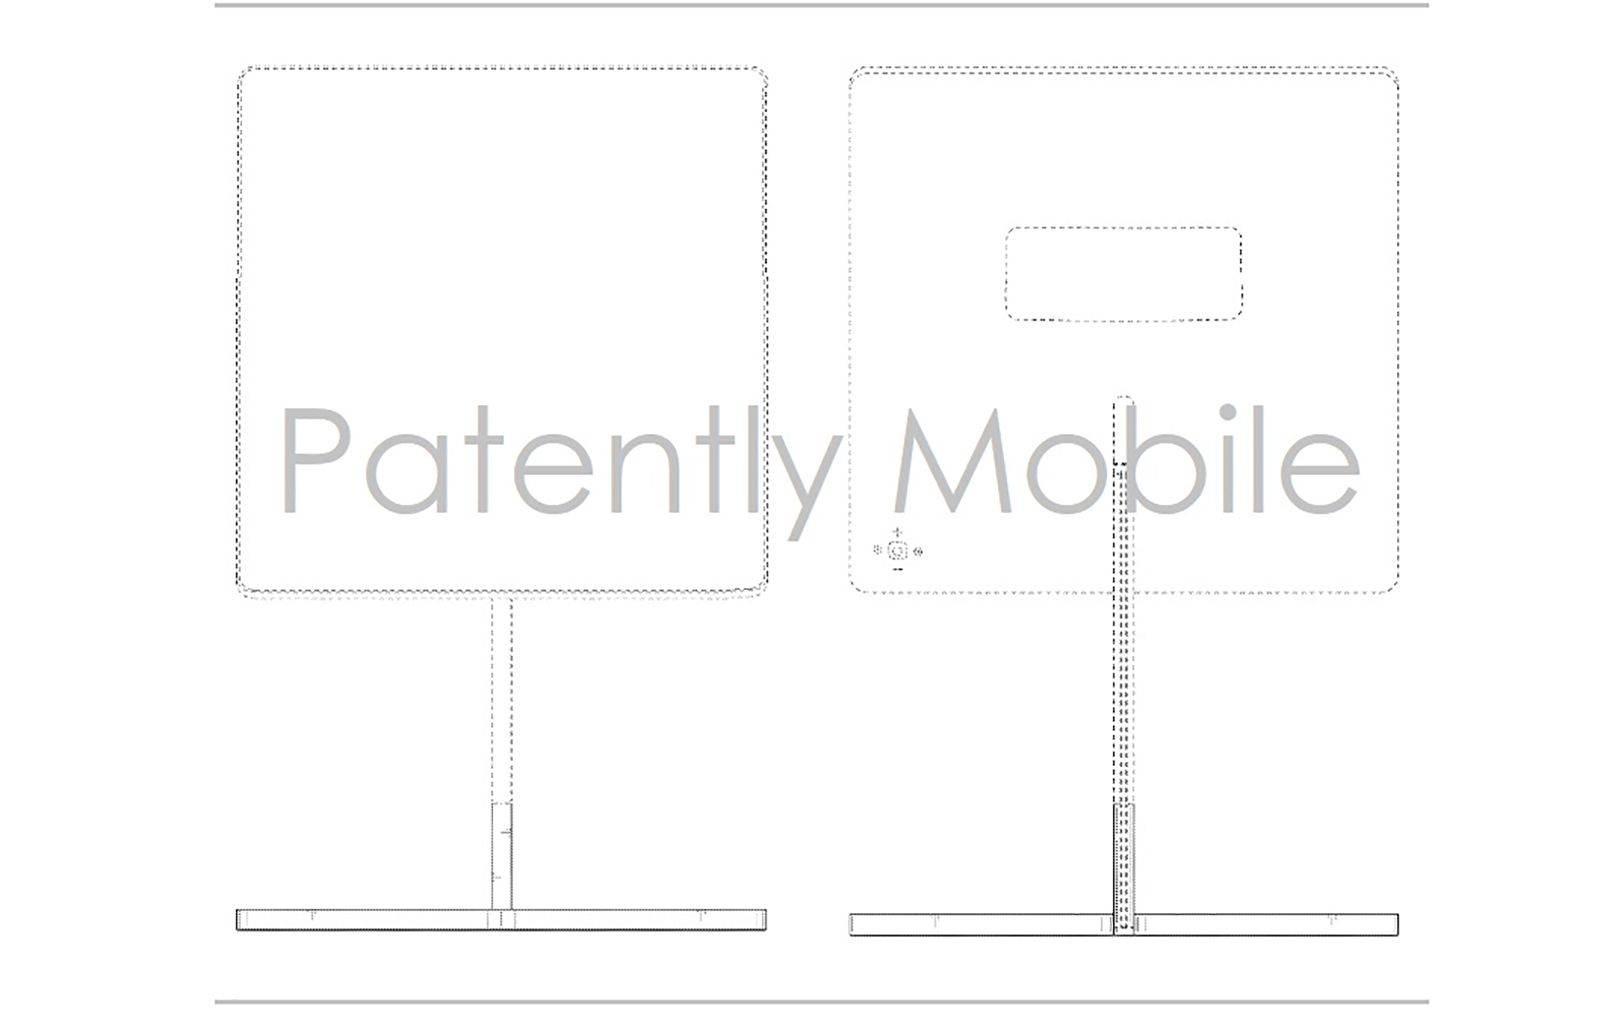 samsung bixby voice controlled speaker incoming patents would suggest so image 1